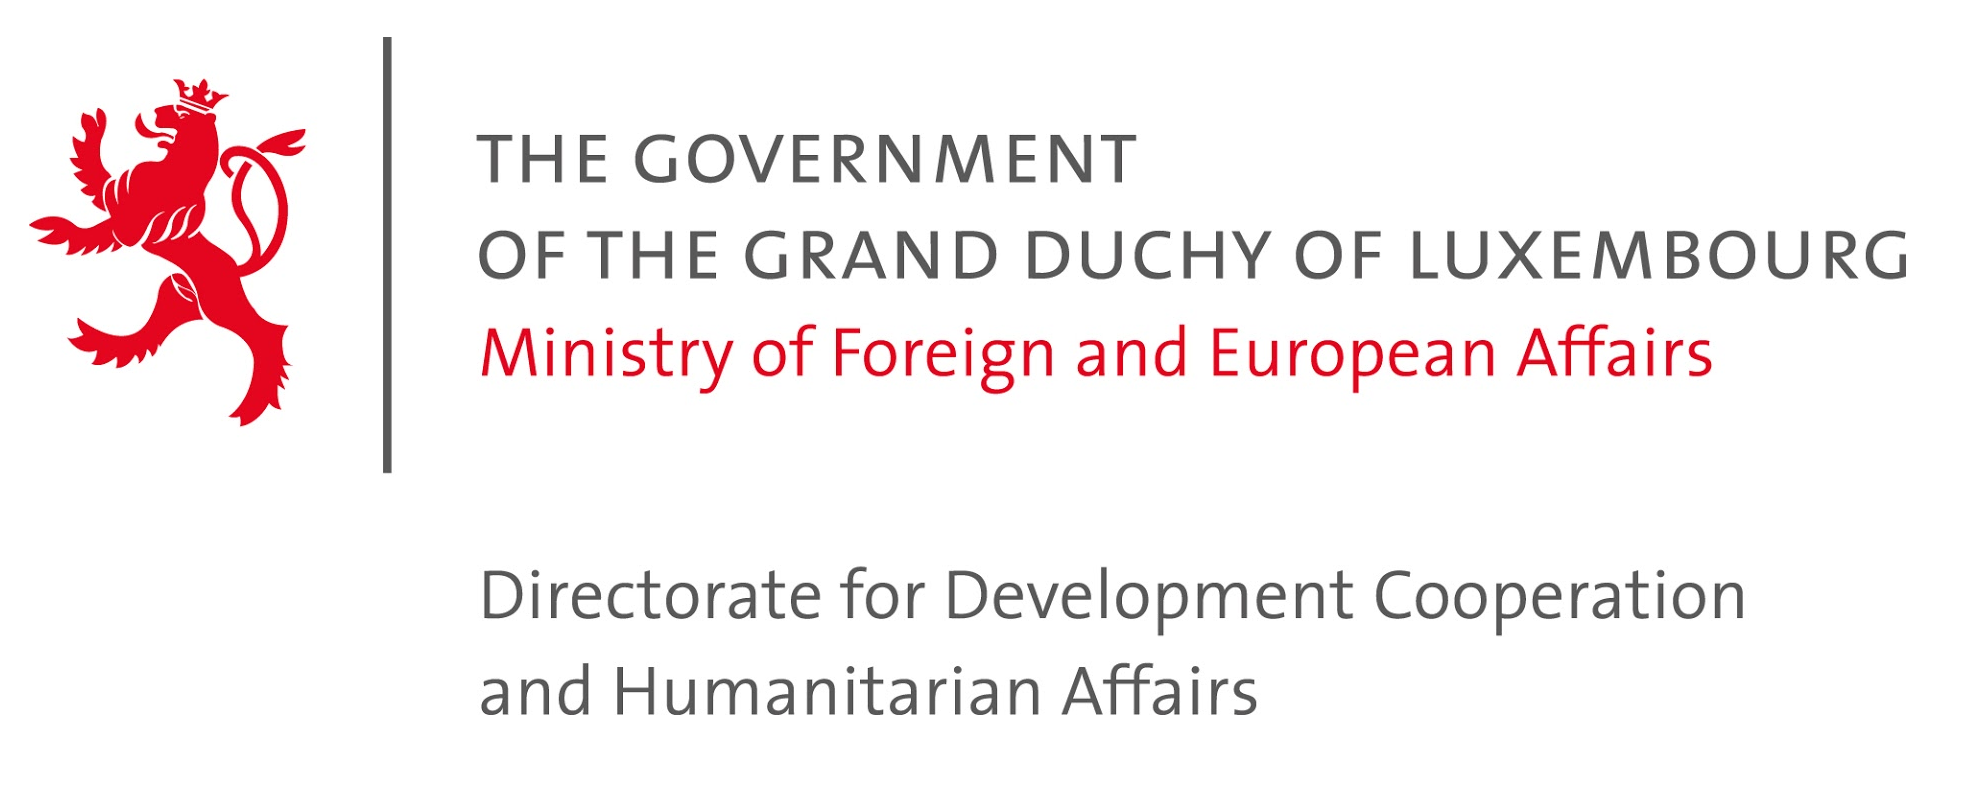 FKL Donor The Government of the Grand Duchy of Luxembourg